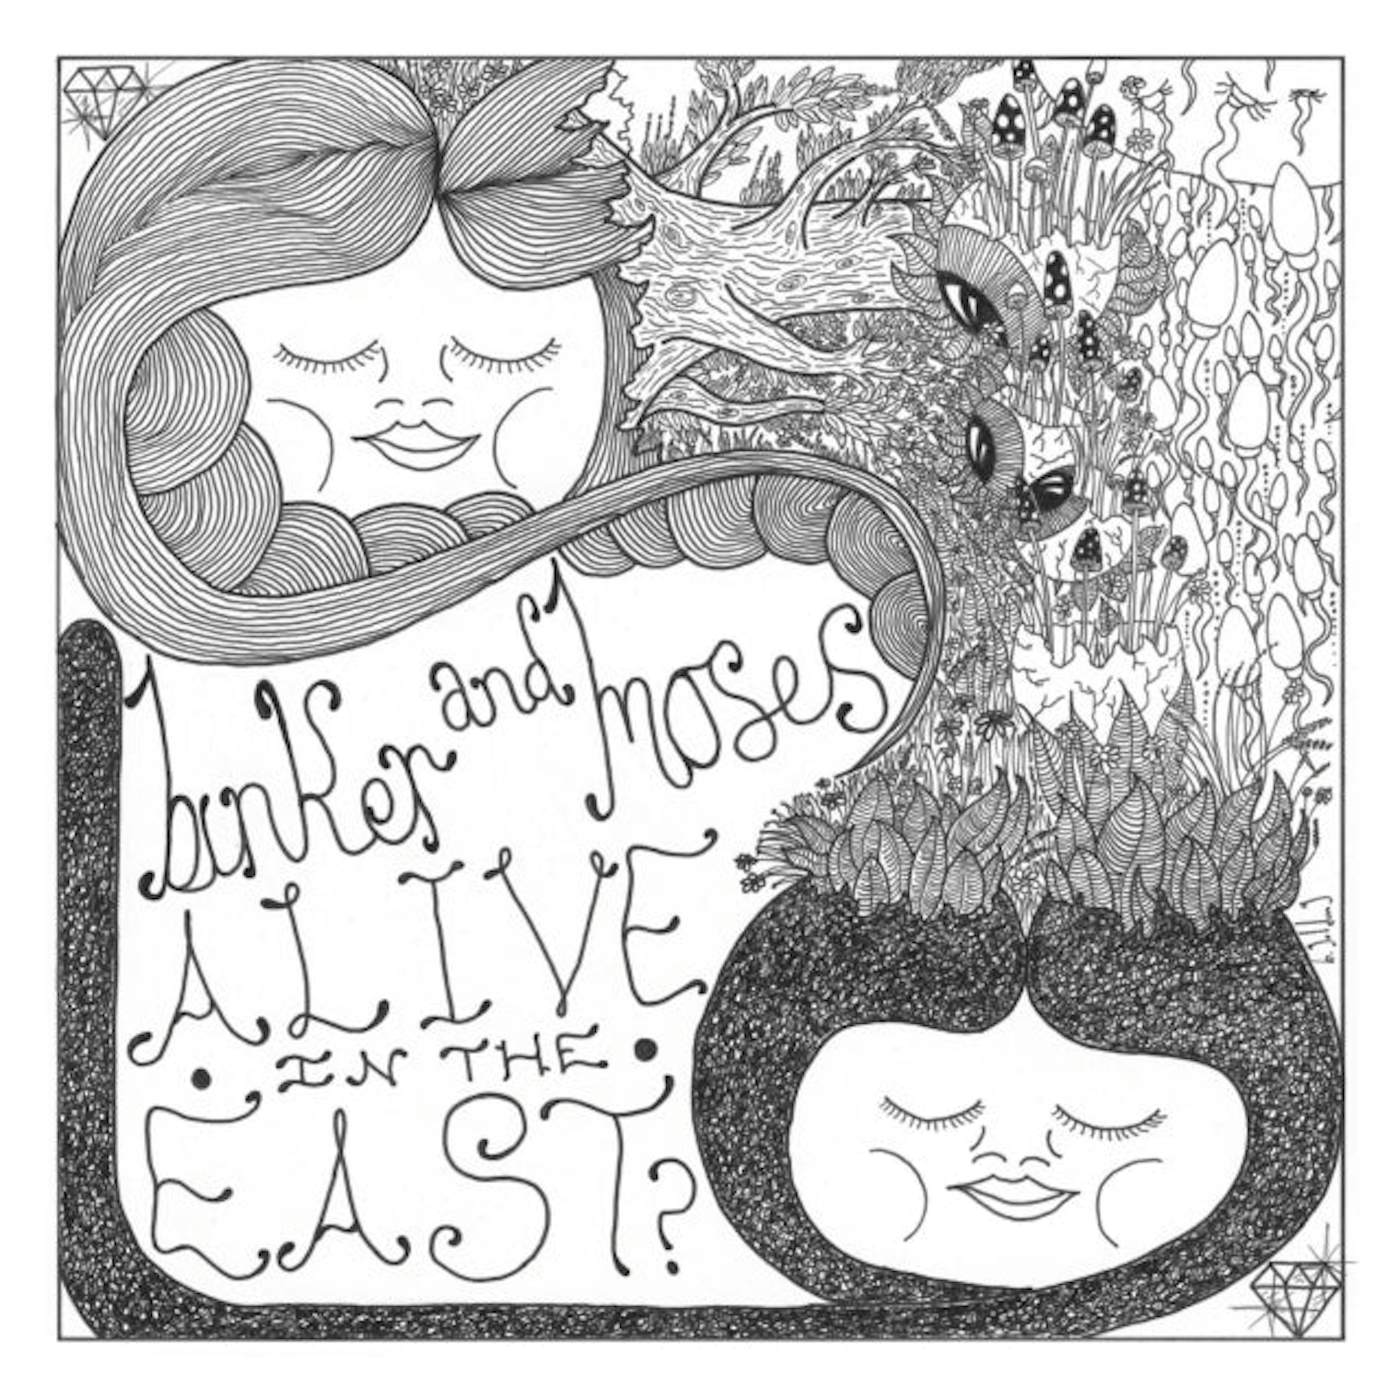 Binker And Moses LP - Alive In The East? (Vinyl)